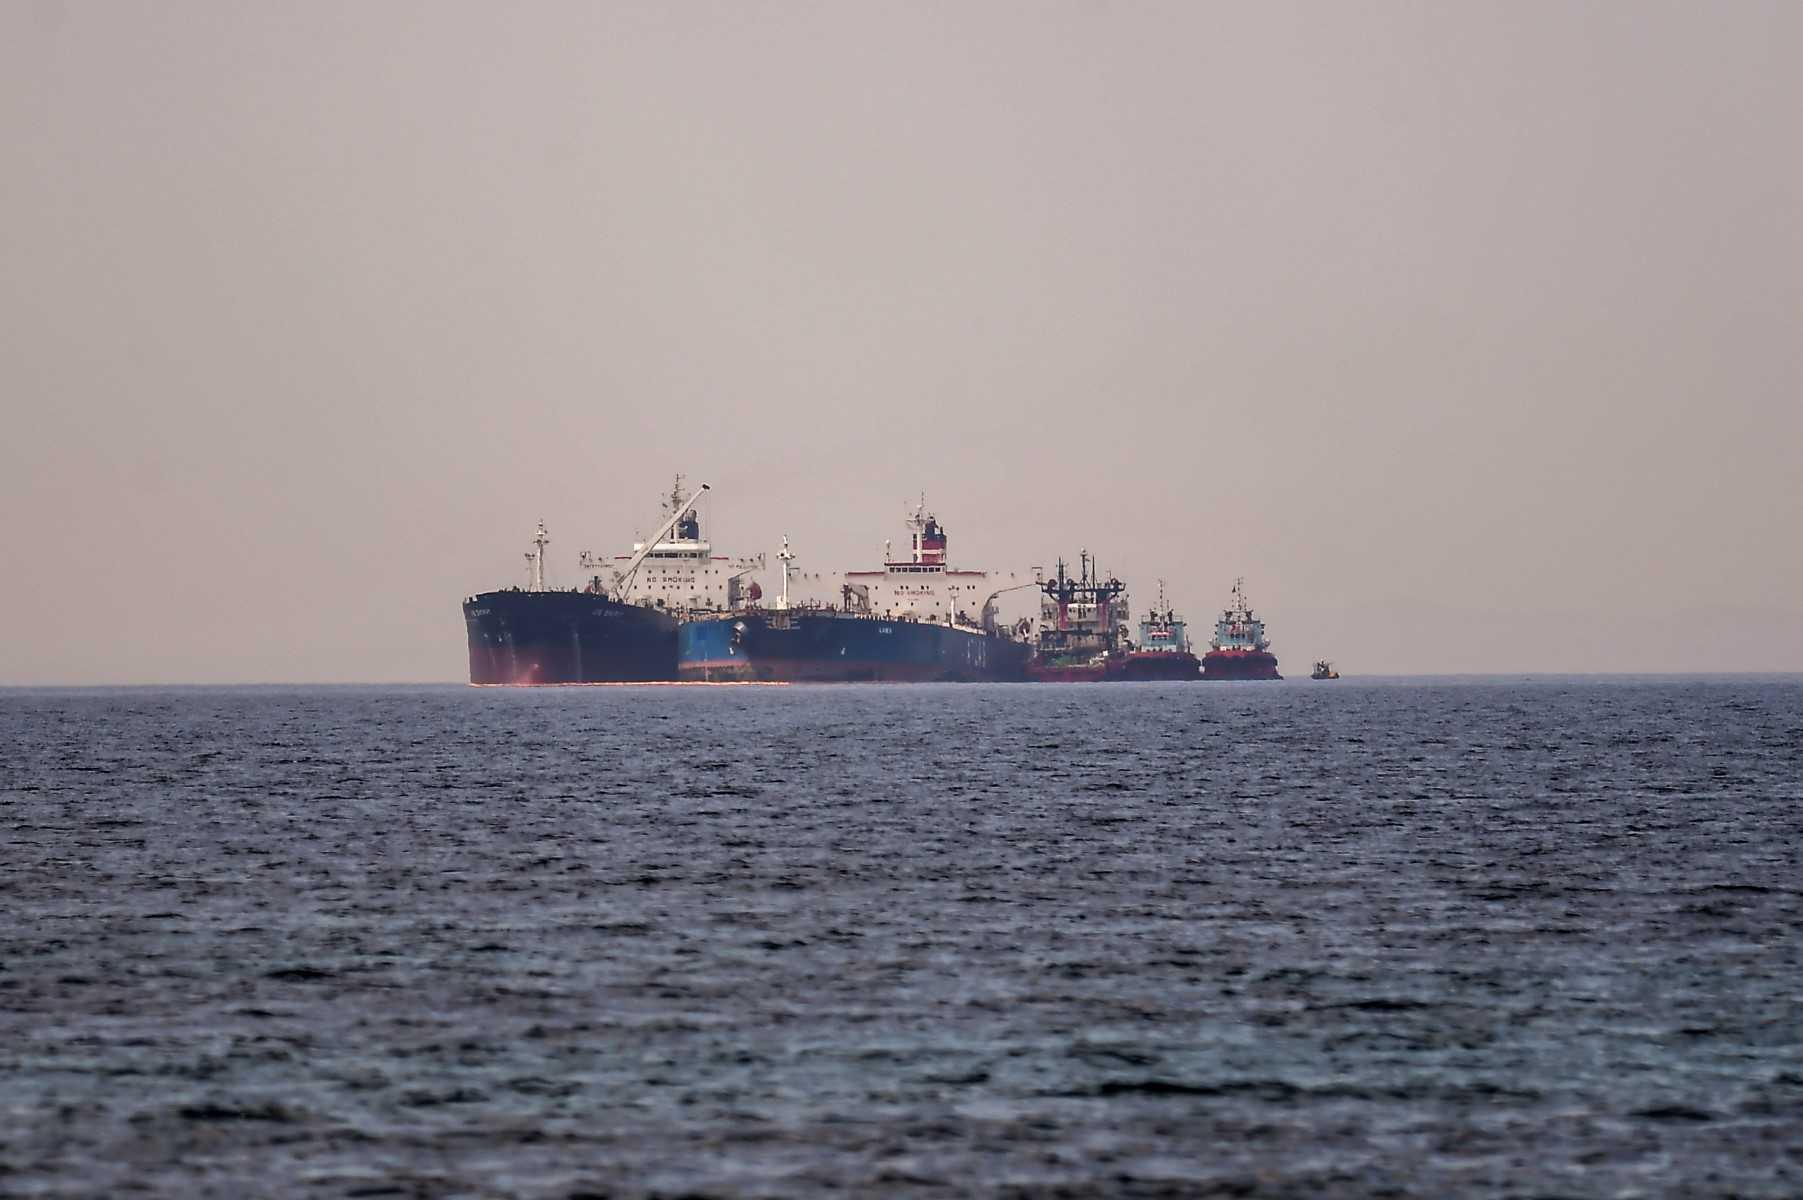 The Liberian-flagged oil tanker Ice Energy (left) transfers crude oil from the Russian-flagged oil tanker Lana (right) (former Pegas), off the shore of Karystos, on the Island of Evia, on May 29, 2022. Photo: Reuters